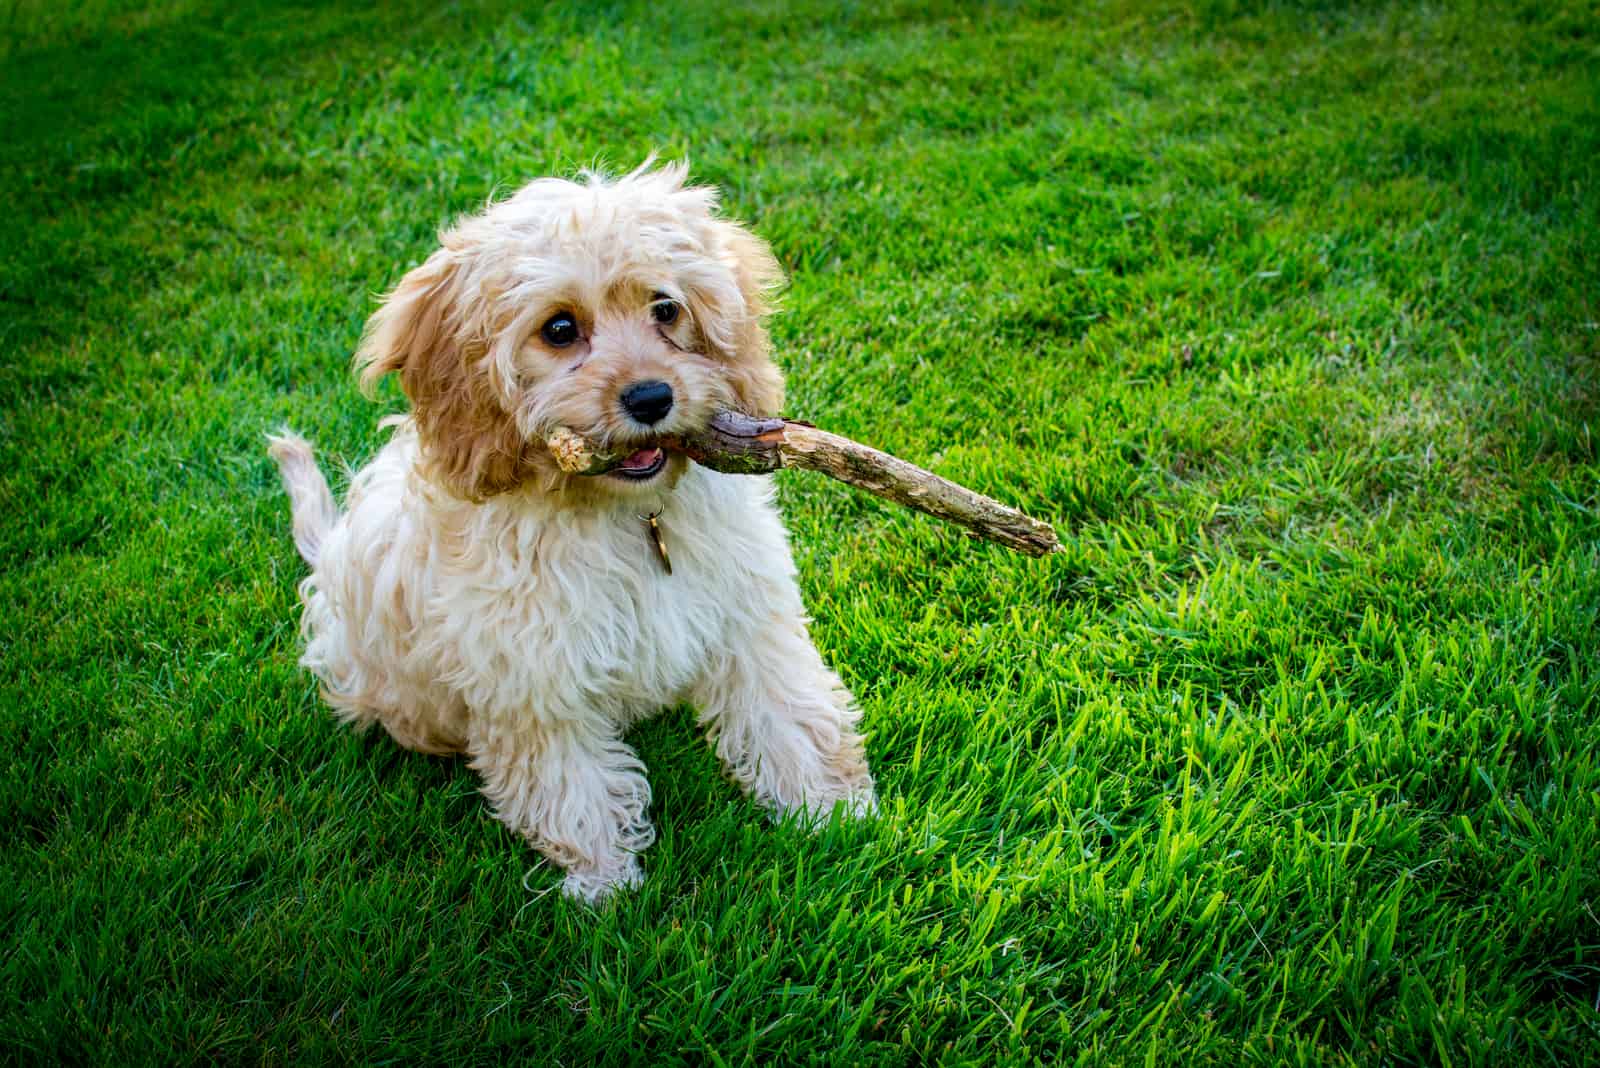 Cavapoo puppy with stick on grass